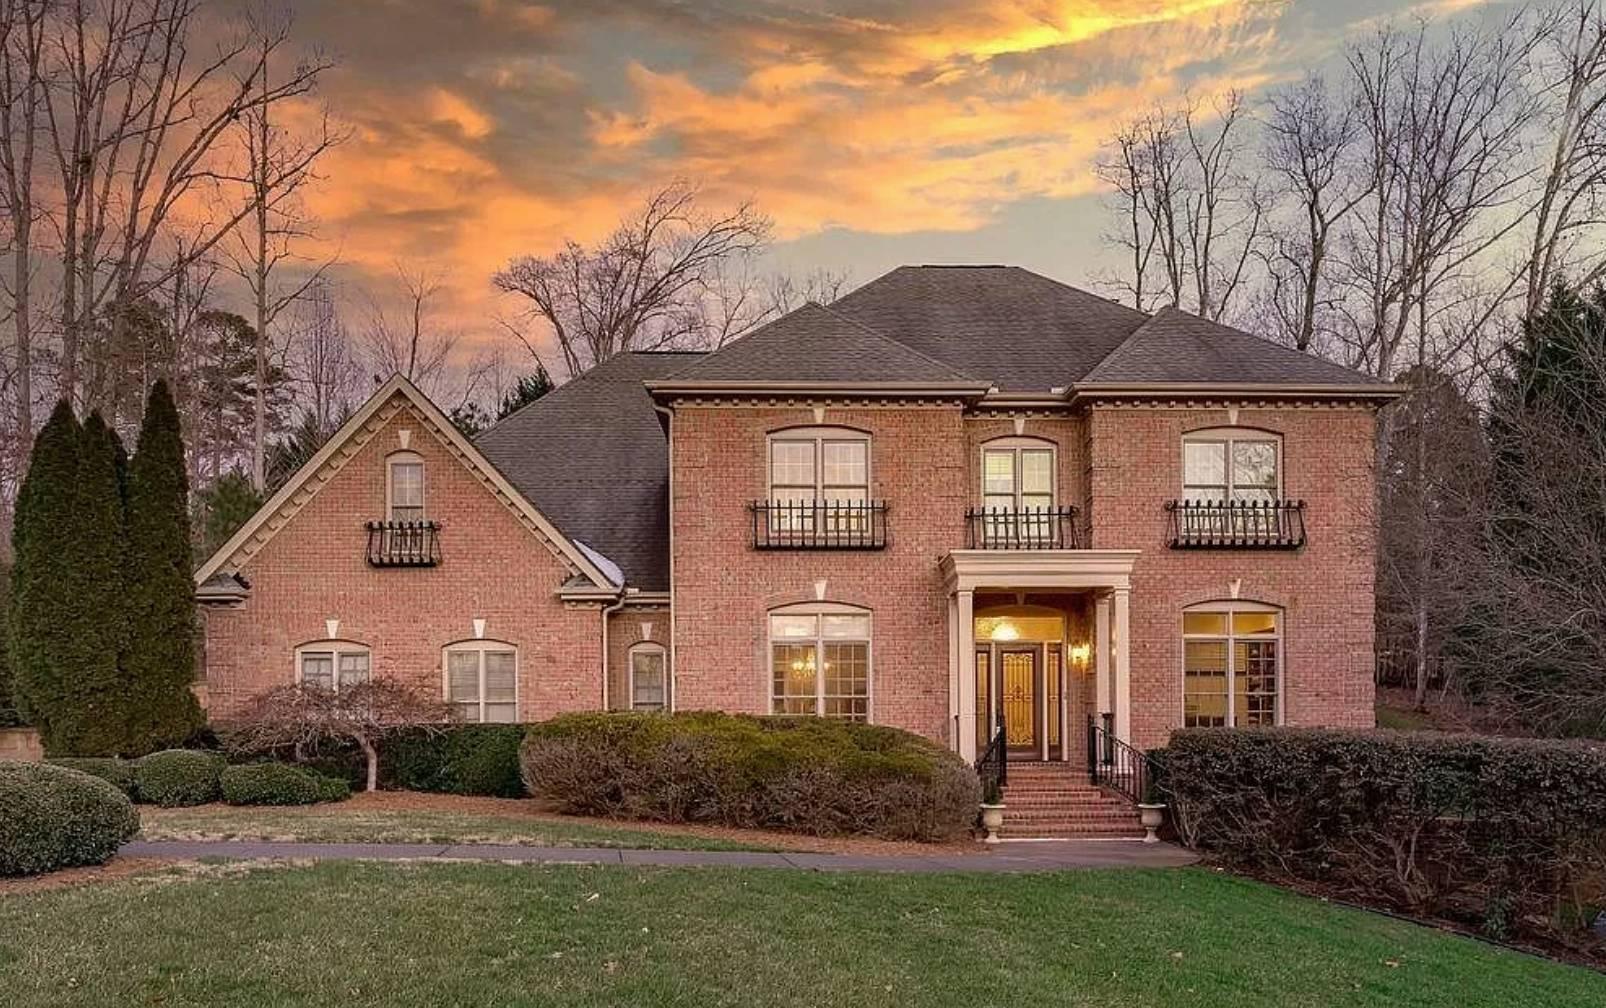 A stunning multistory red brick home with arched windows, cream trim, a gray roof, an impressive entryway, mature landscaping with shrubs and trees